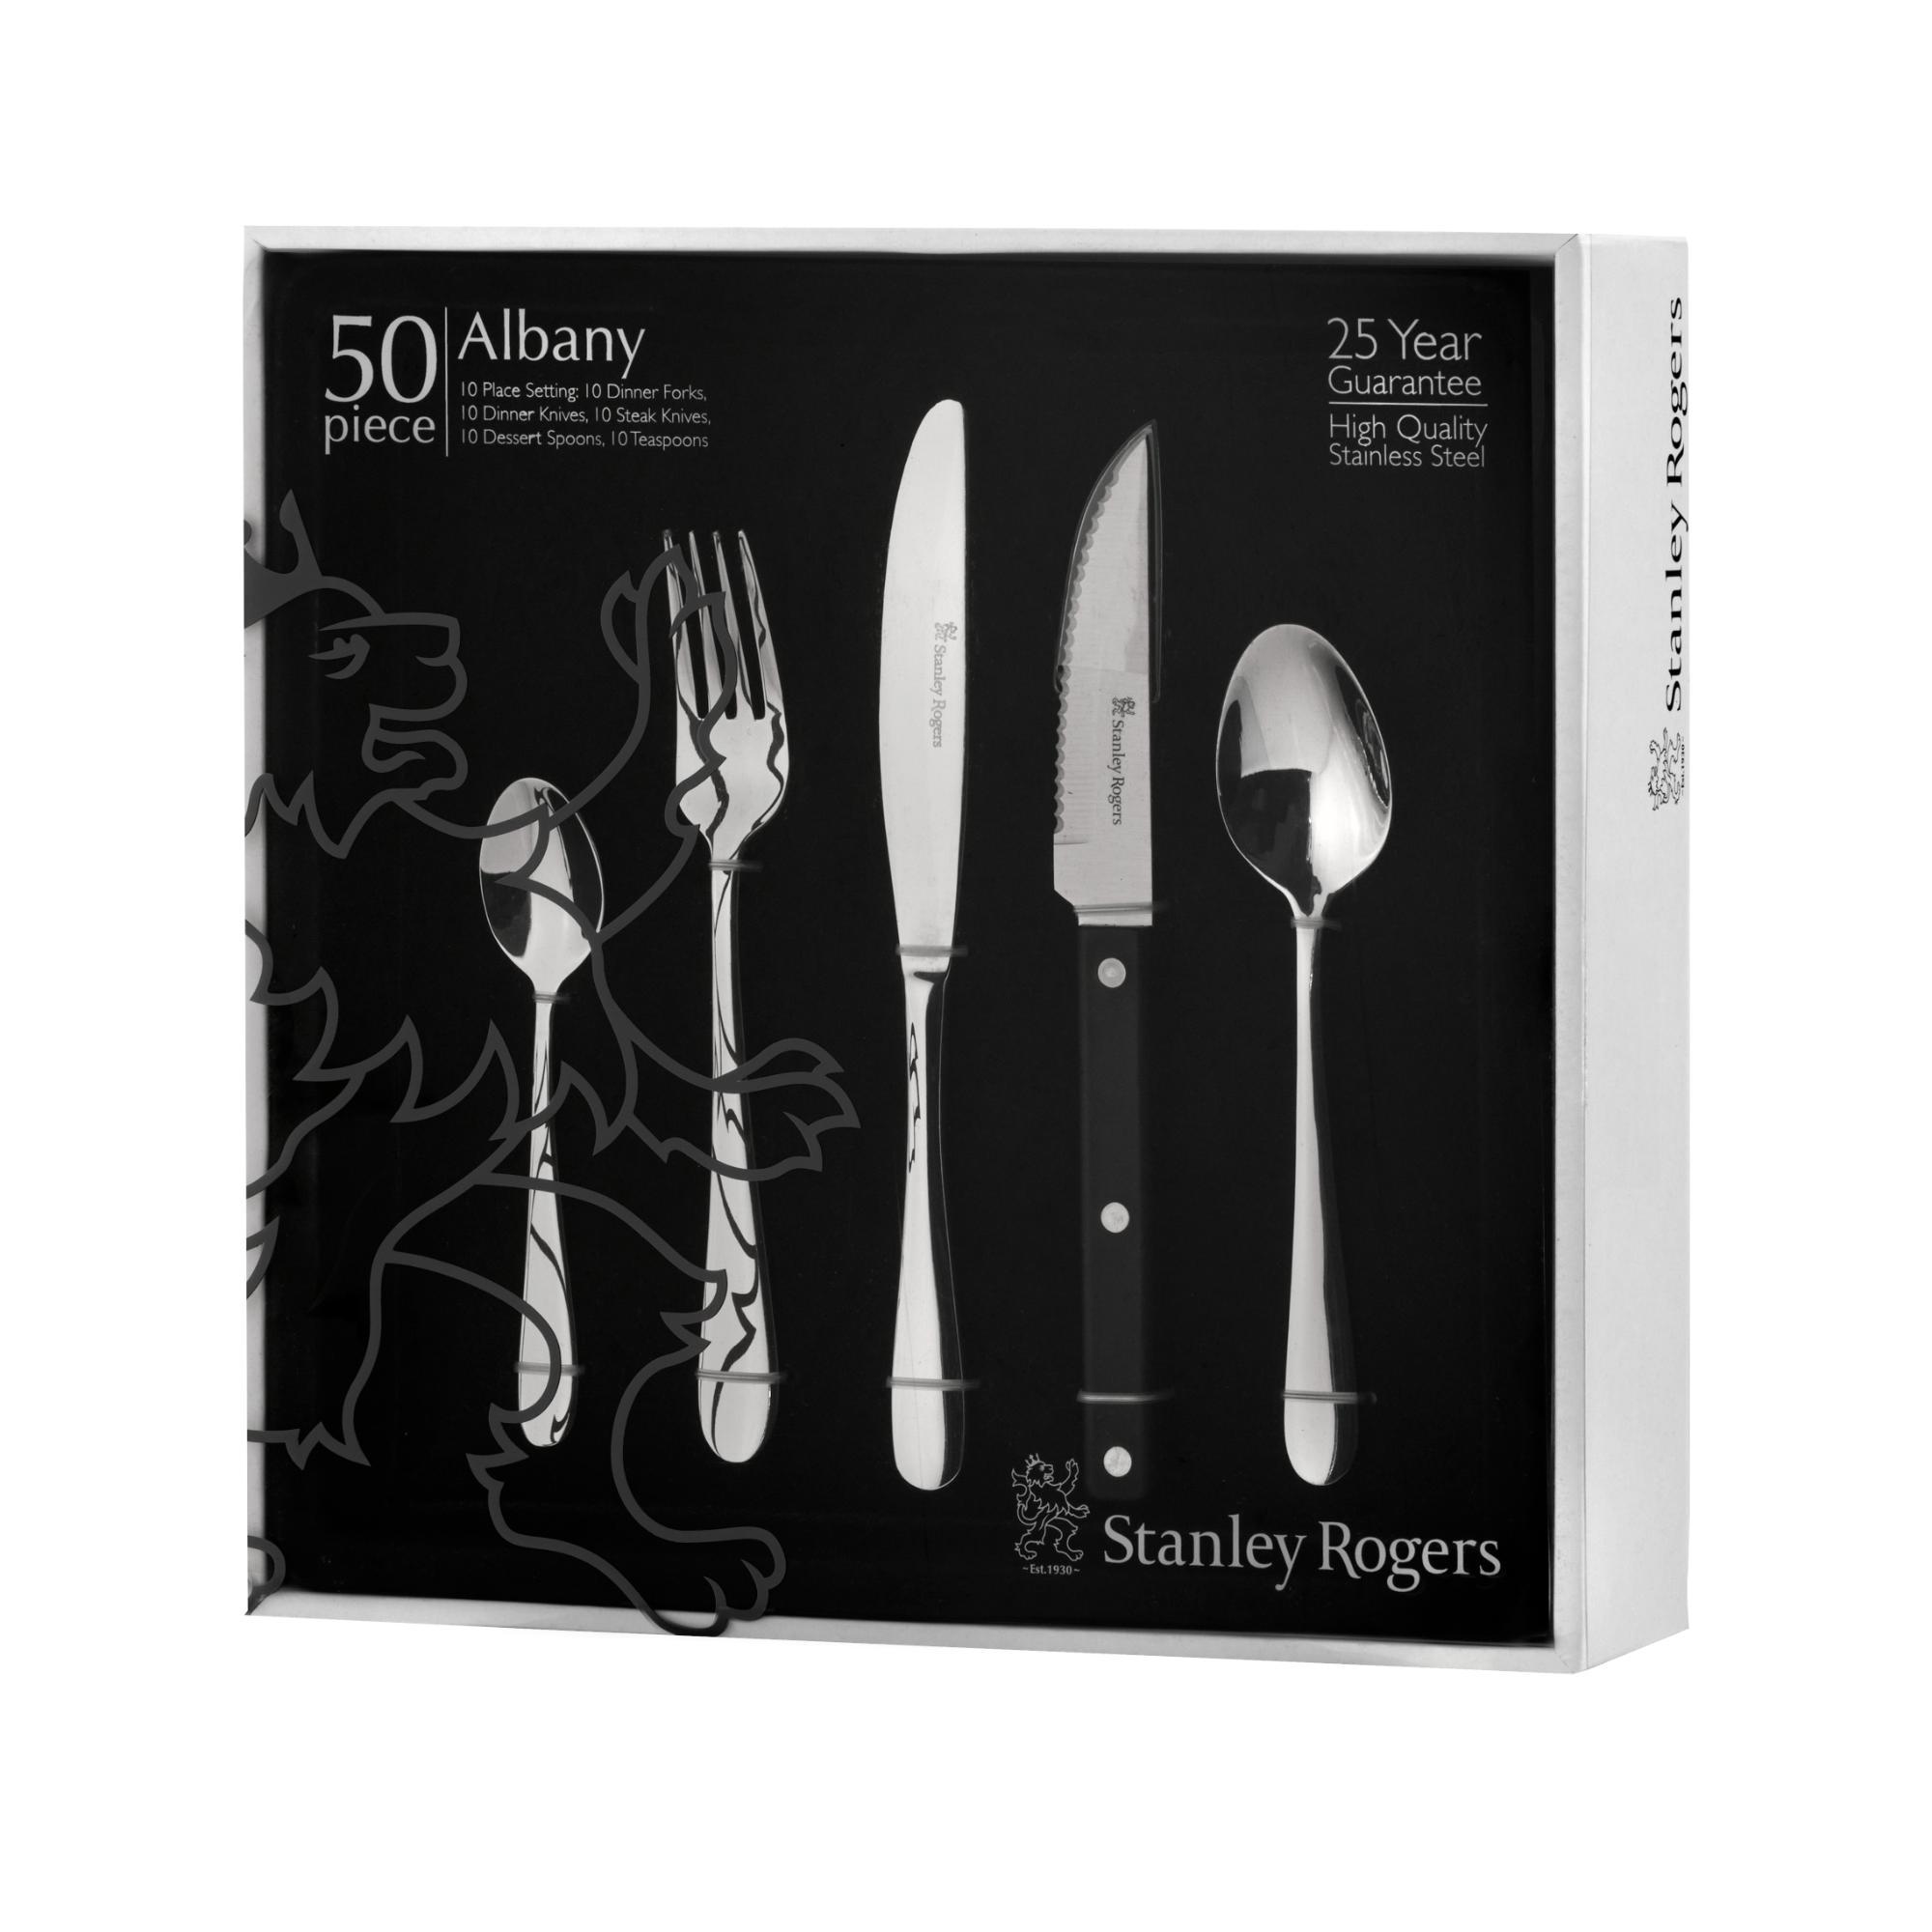 Stanley Rogers Albany Cutlery Set 50pc Image 5